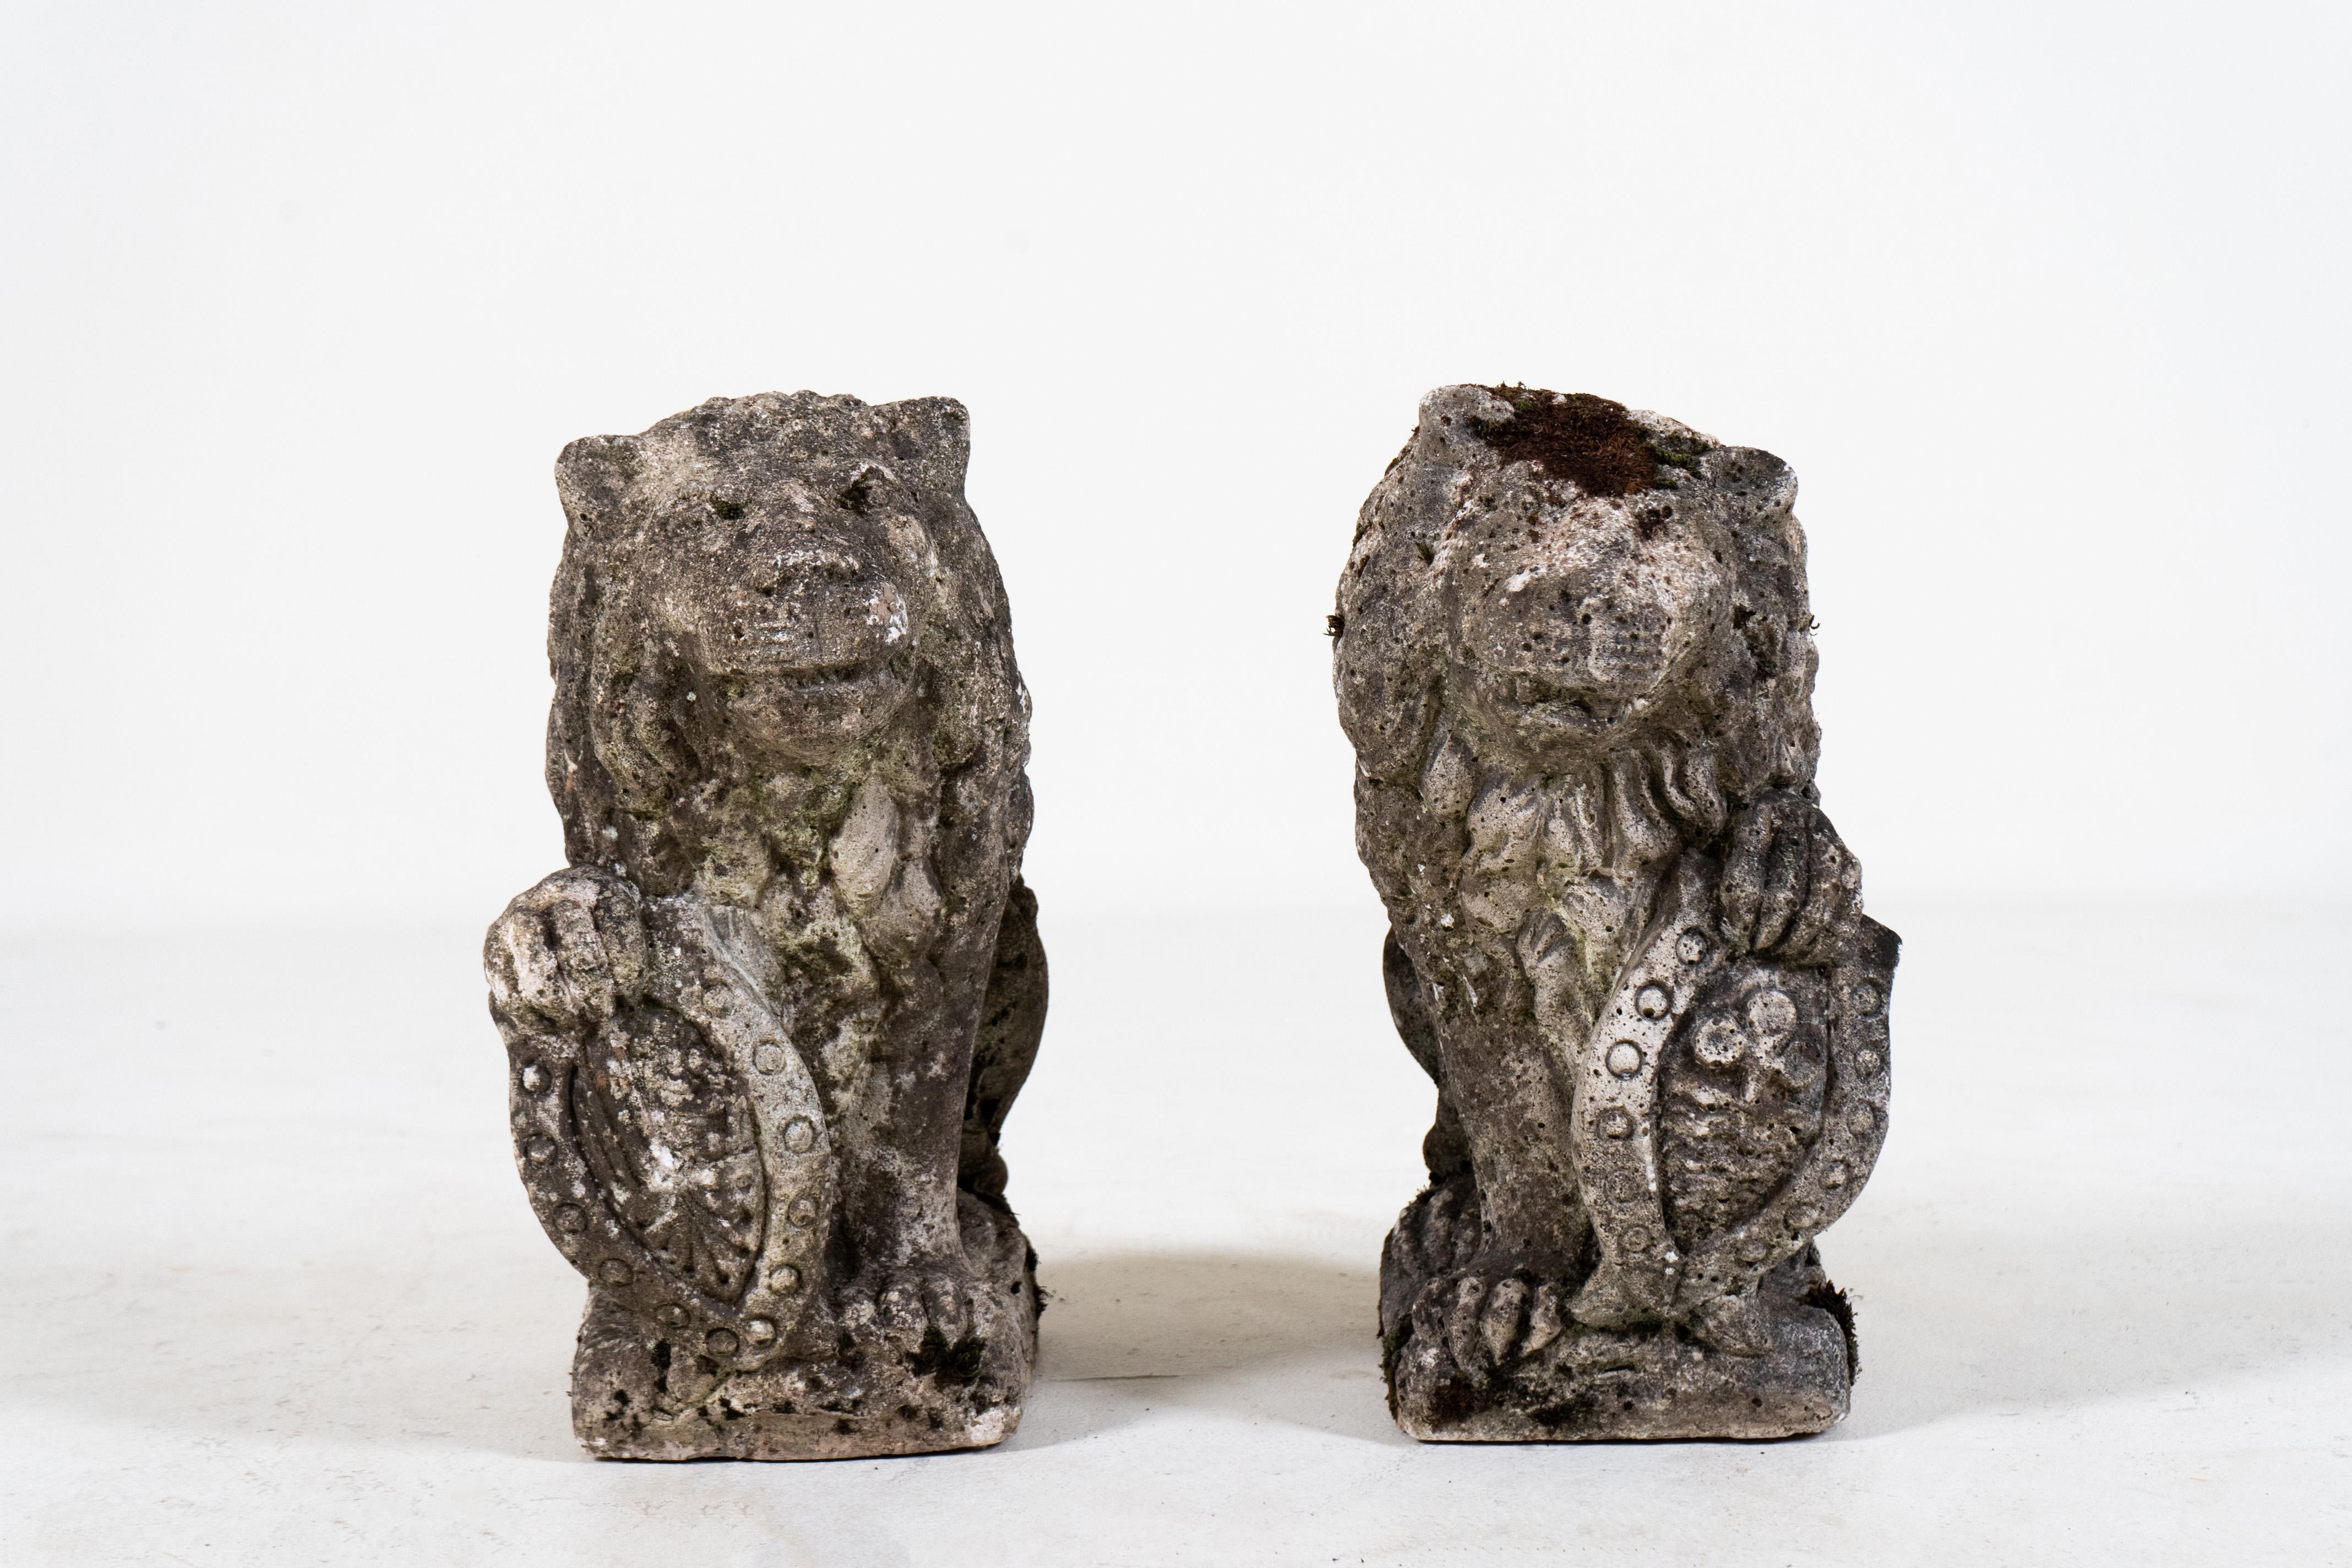 This antique pair of tufa limestone garden lions dates to the early 19th century and came from southern France or possibly, Italy. The lions are quite regal in appearance and hold heraldic shields with their paws. Their condition is good for their